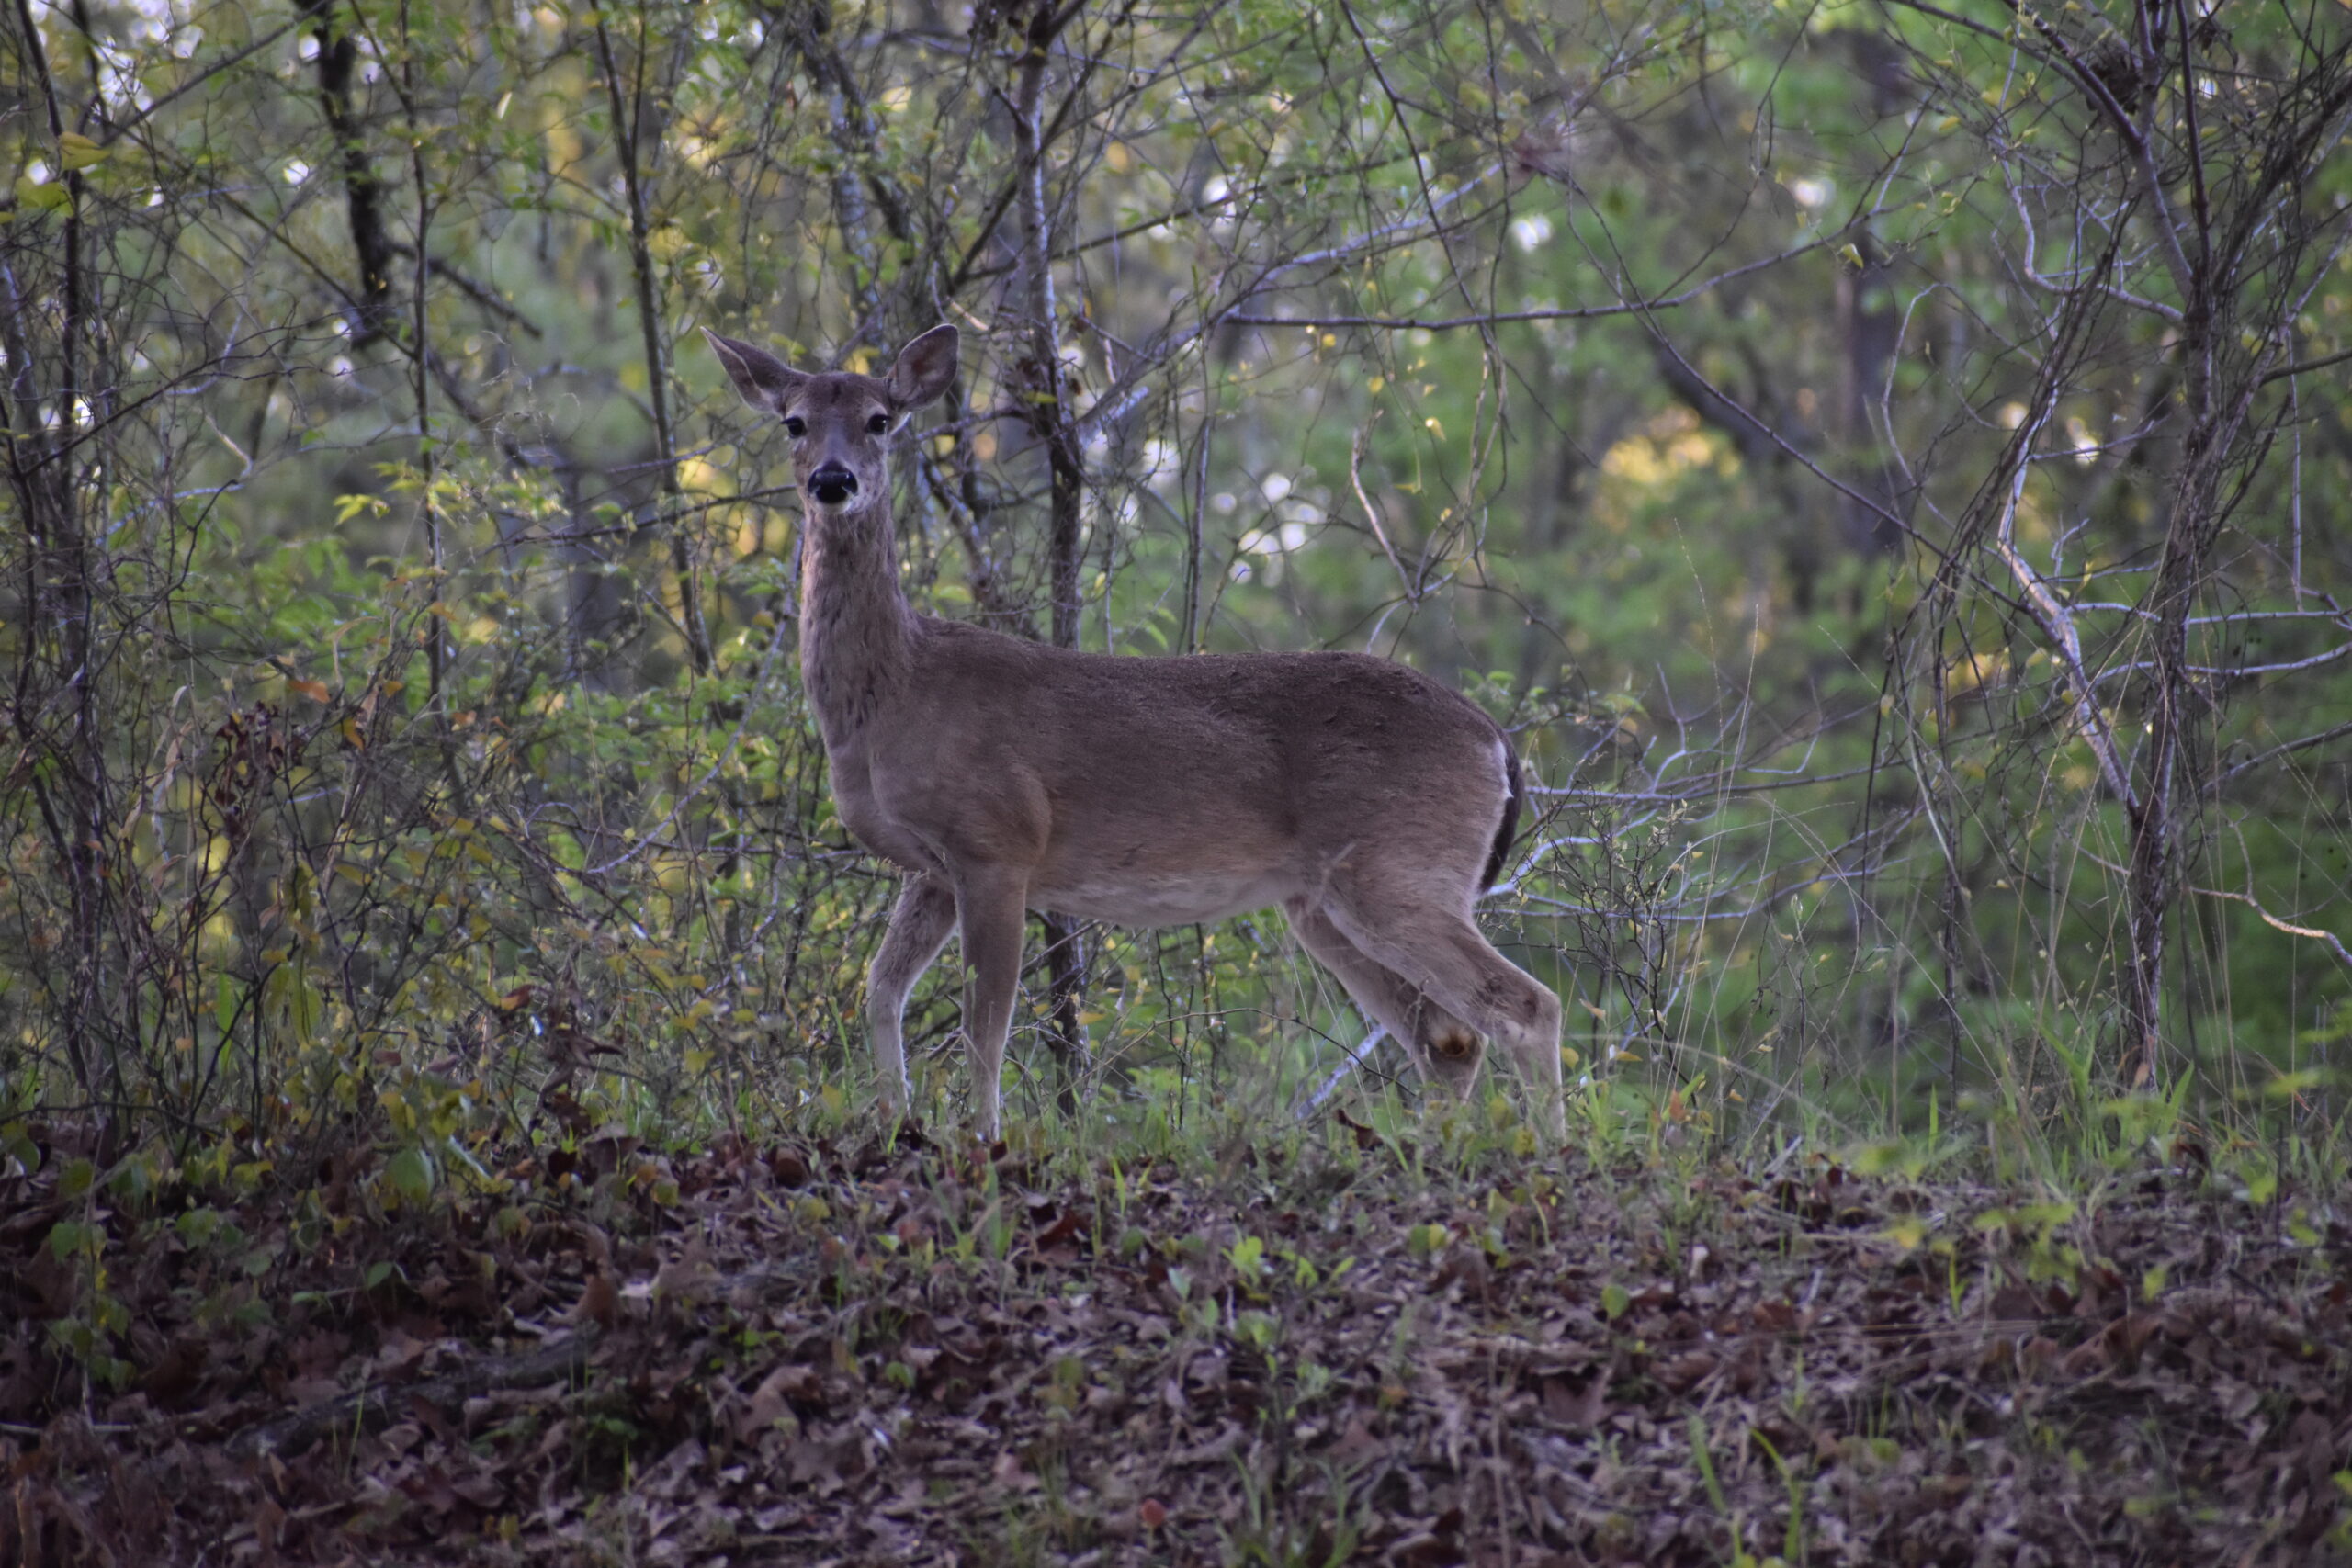 A deer stands still in a wooded area and looks our directions.